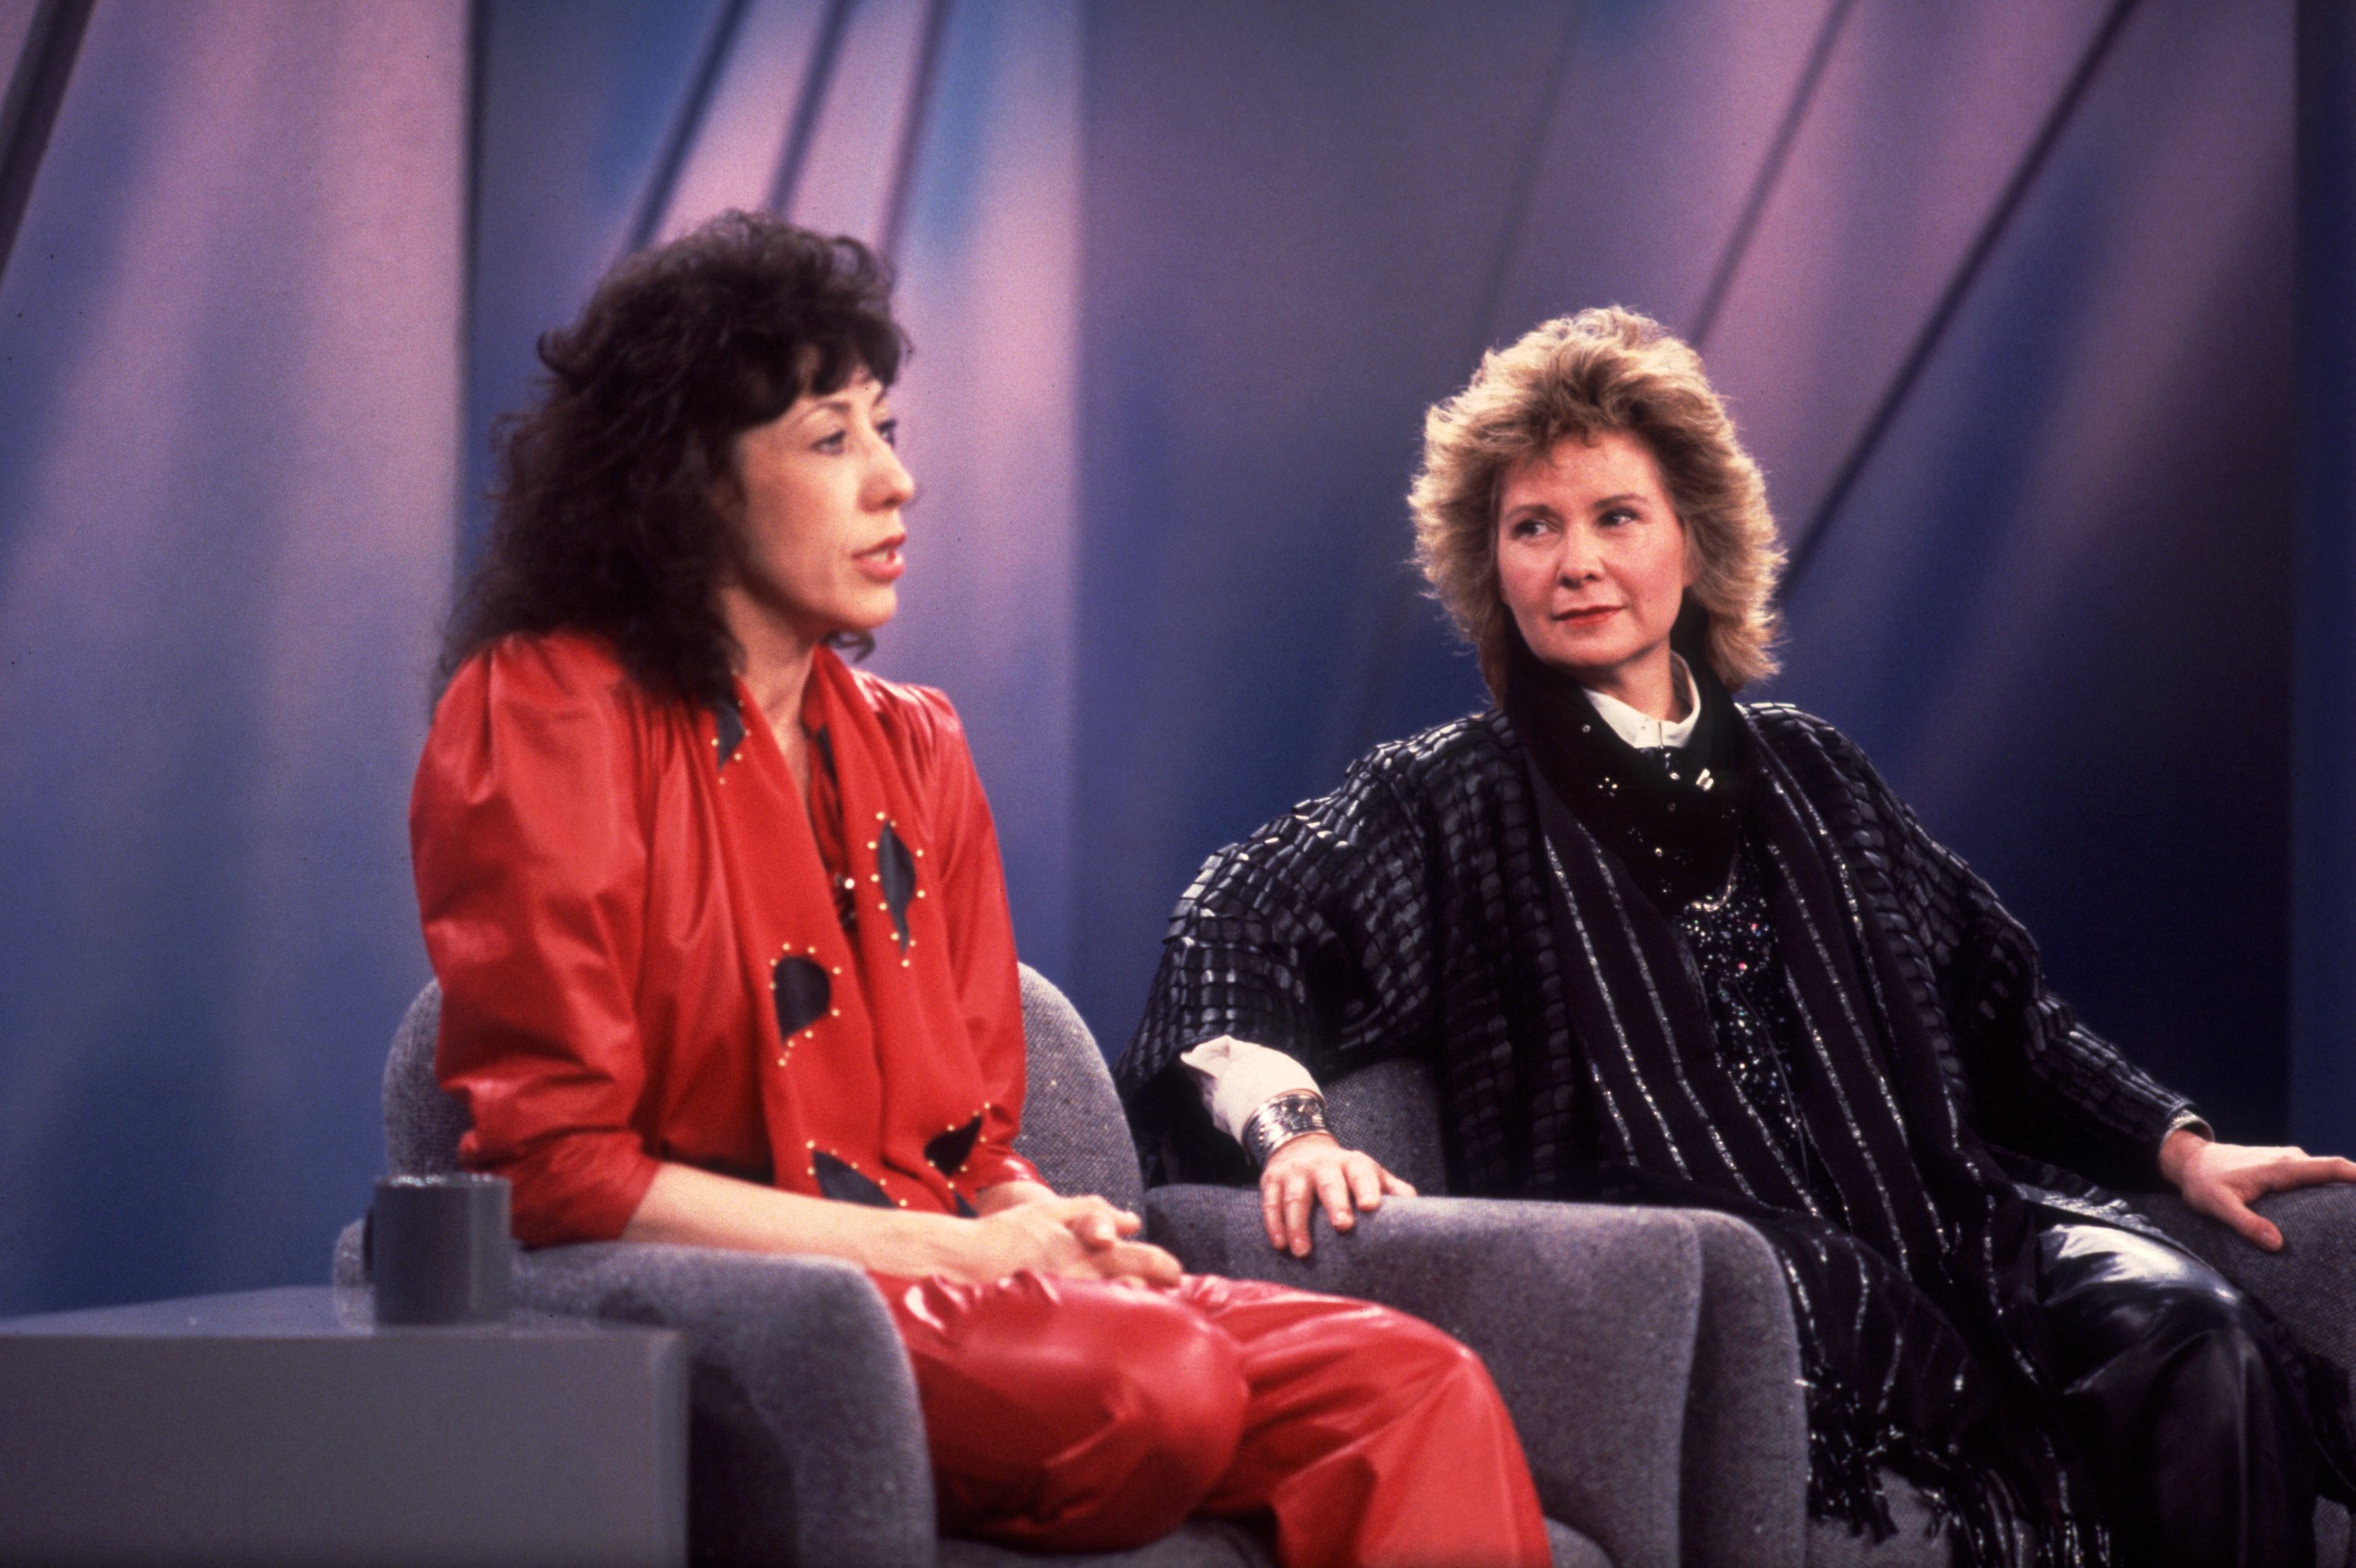 Lily Tomlin and Jane Wagner on an episode of "The Oprah Winfrey Show," in Chicago, Illinois, on November 2, 1986. | Source: Paul Natkin/Getty Images